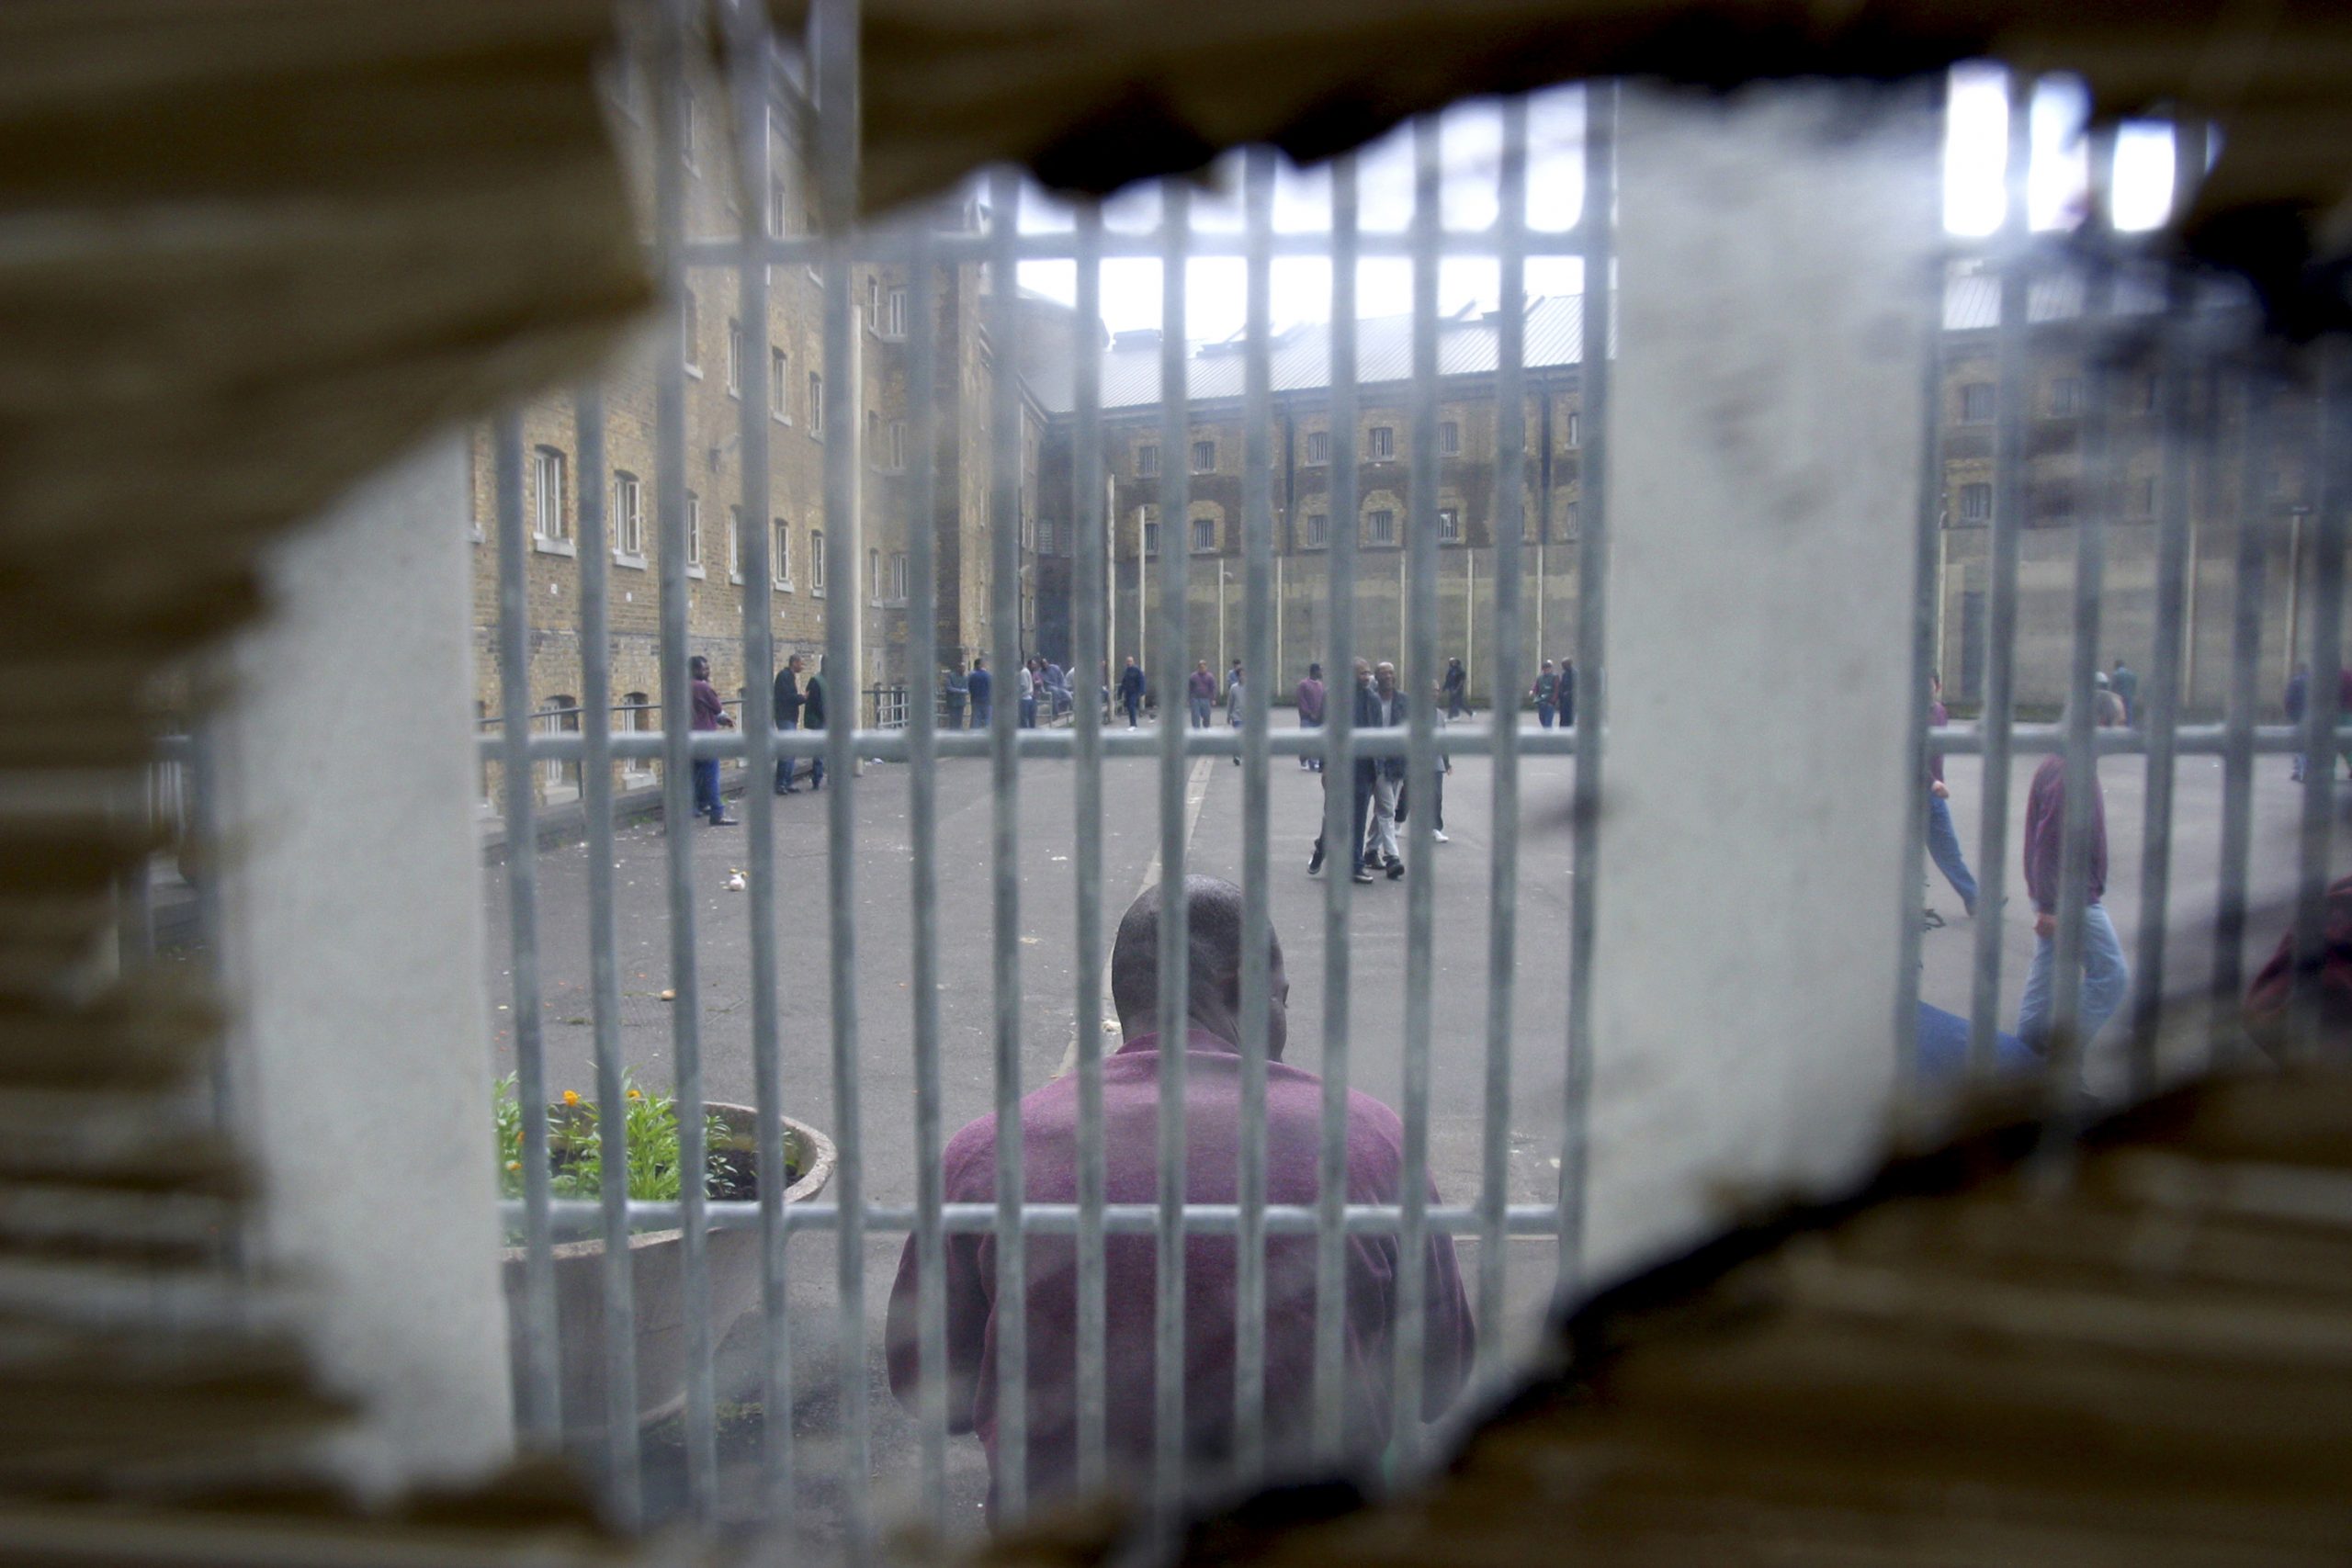 A view of the priosn the exercise yard from inside the jail. HMP Wandsworth, London, United Kingdom